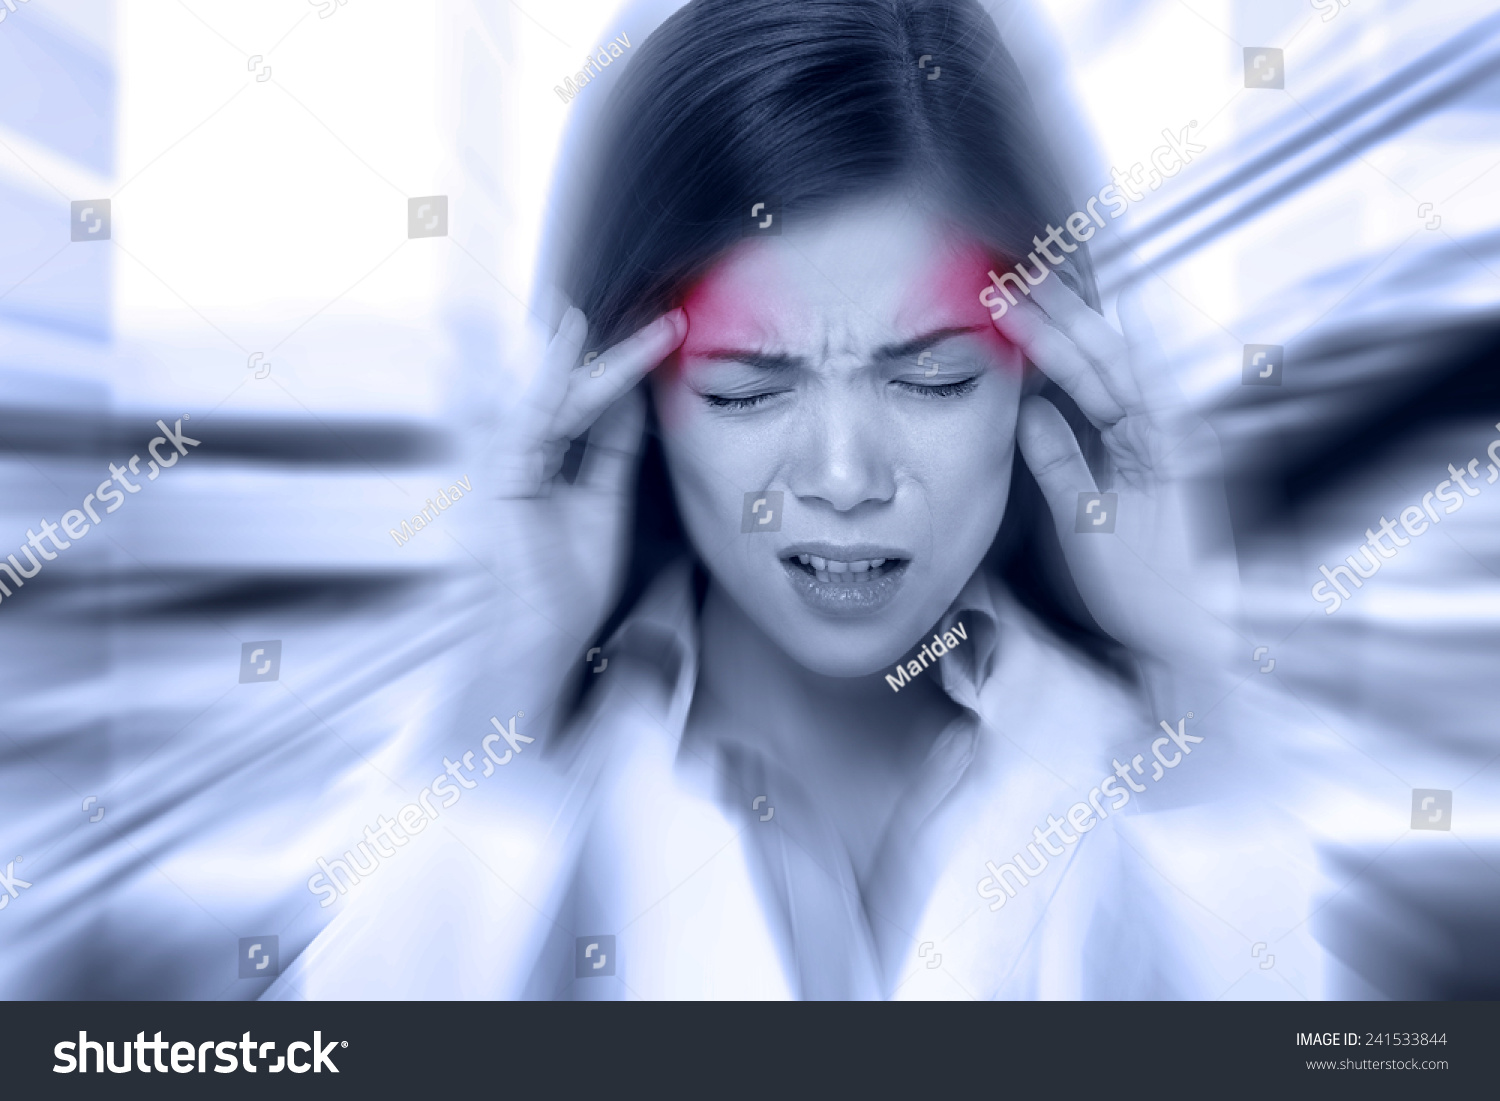 Headache migraine people - Doctor woman stressed. Woman Nurse / doctor with migraine headache overworked and stressed. Health care professional in lab coat wearing stethoscope at hospital. #241533844